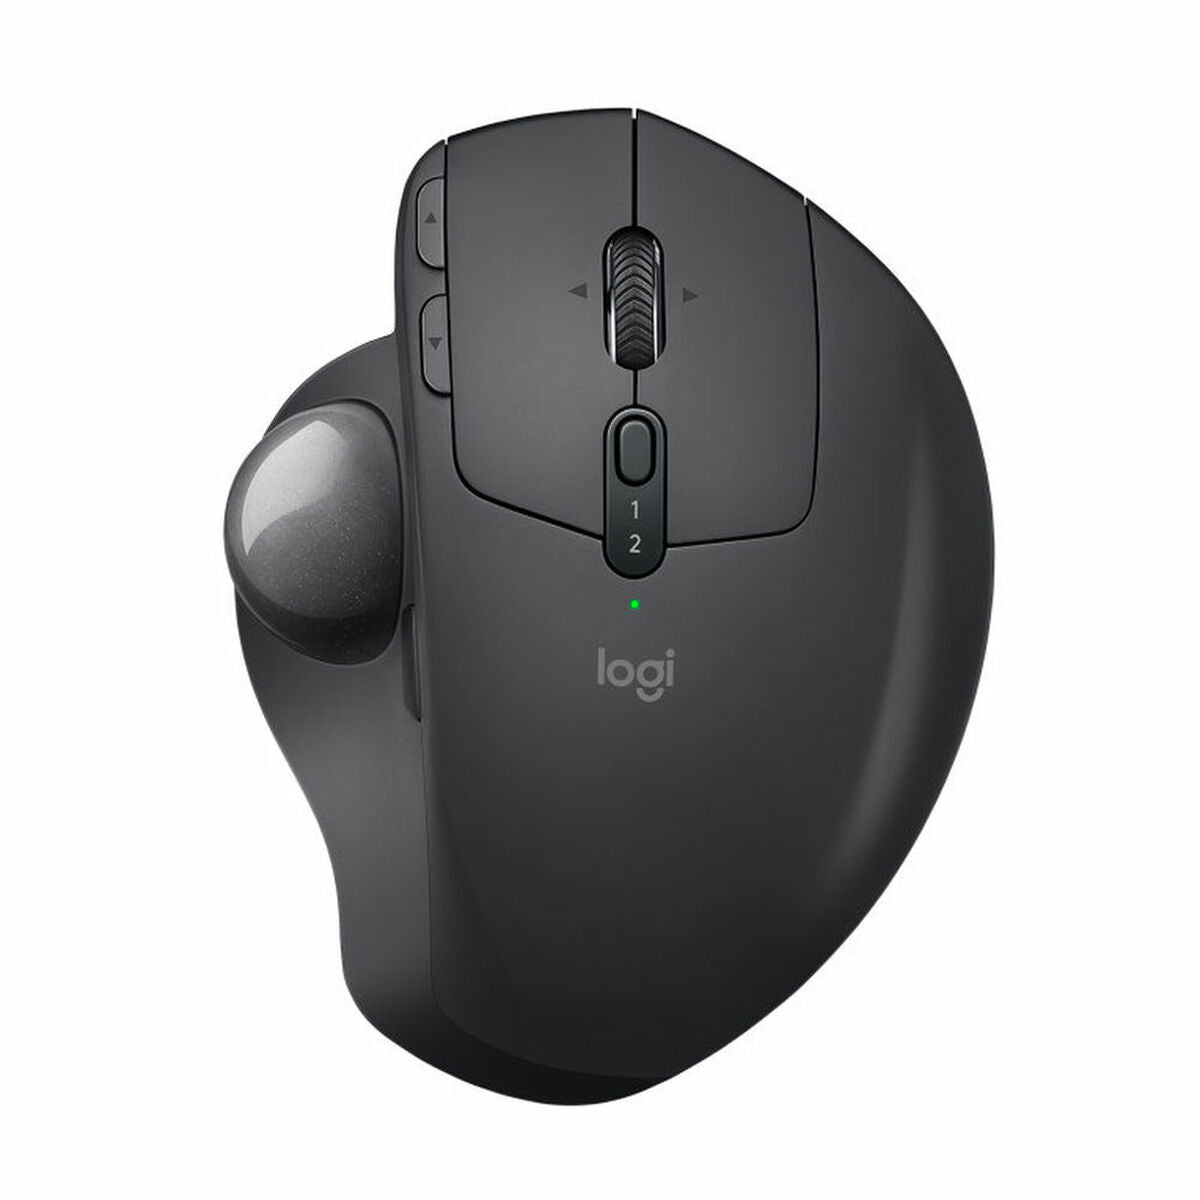 Wireless Bluetooth Mouse Logitech 910-005179 Black Grey Steel, Logitech, Computing, Accessories, wireless-bluetooth-mouse-logitech-910-005179-black-grey-steel, Brand_Logitech, category-reference-2609, category-reference-2642, category-reference-2656, category-reference-t-19685, category-reference-t-19908, category-reference-t-21353, category-reference-t-25626, computers / peripherals, Condition_NEW, office, Price_50 - 100, Teleworking, RiotNook